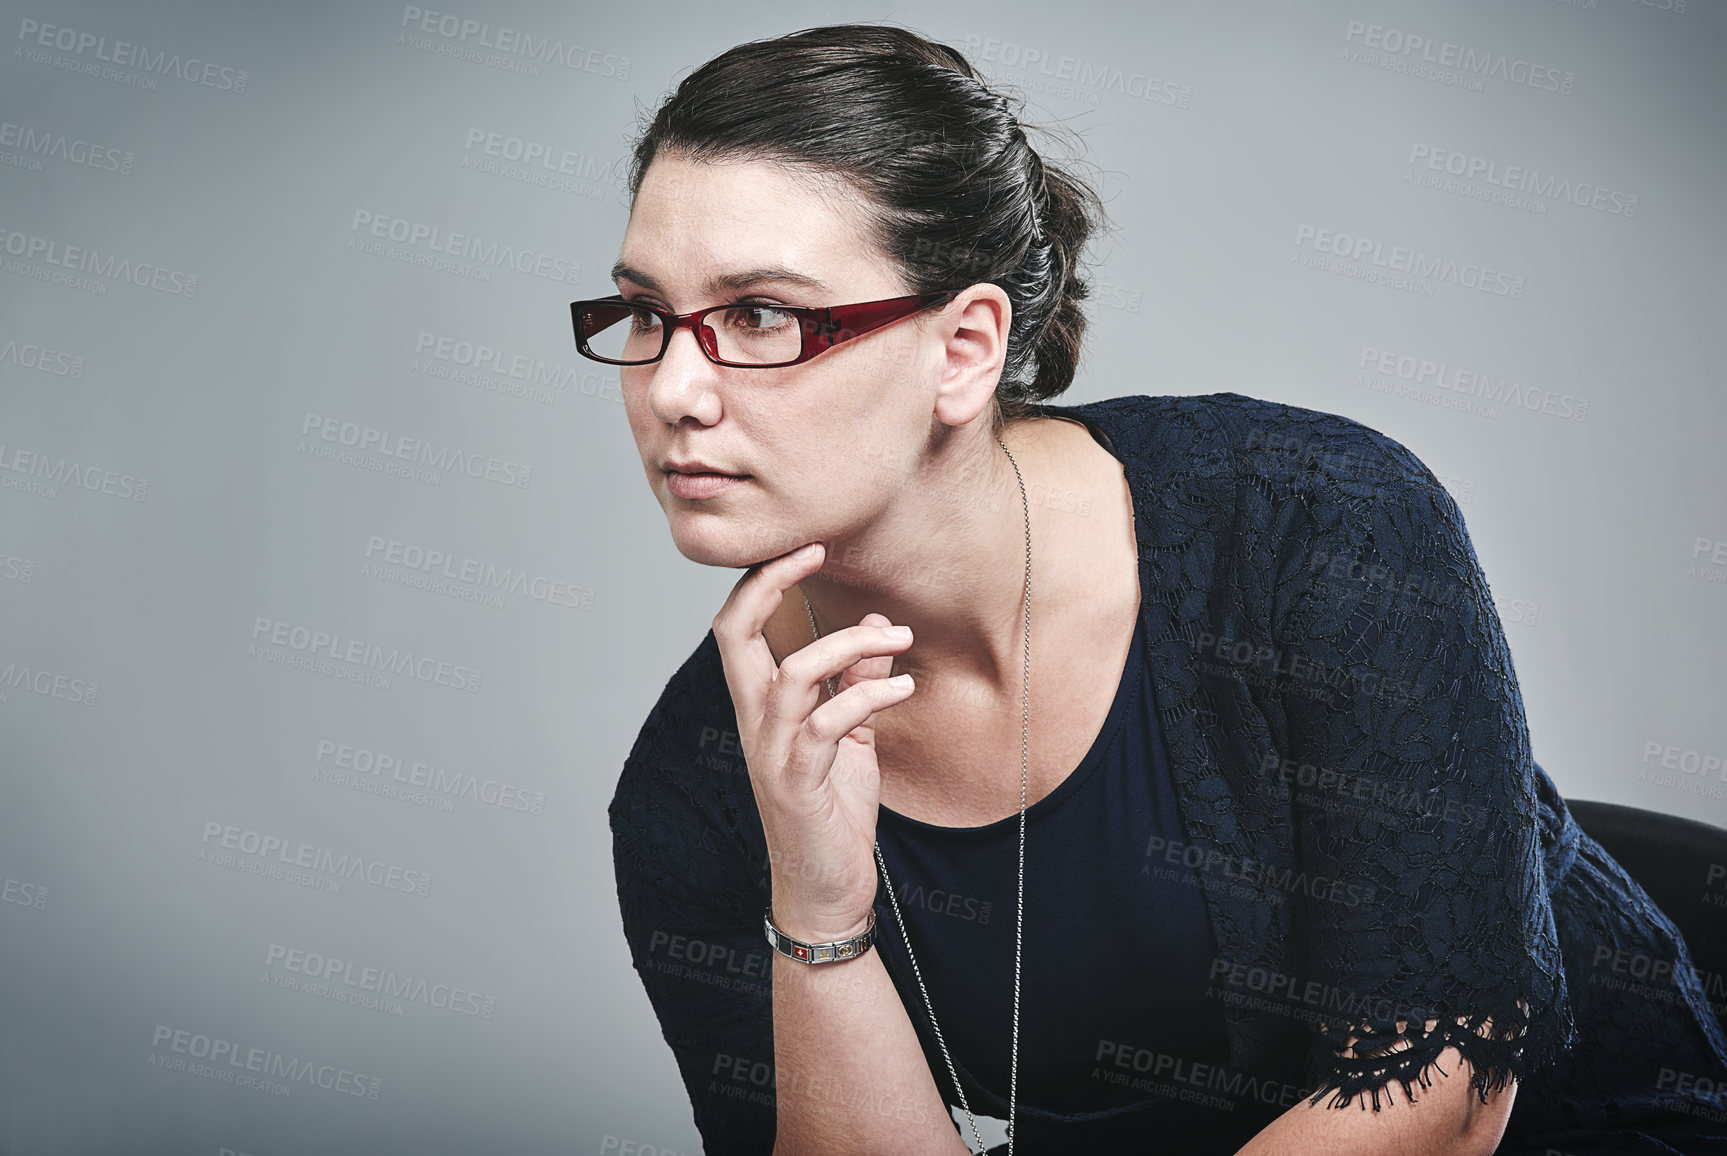 Buy stock photo Studio shot of a young businesswoman looking thoughtful against a grey background